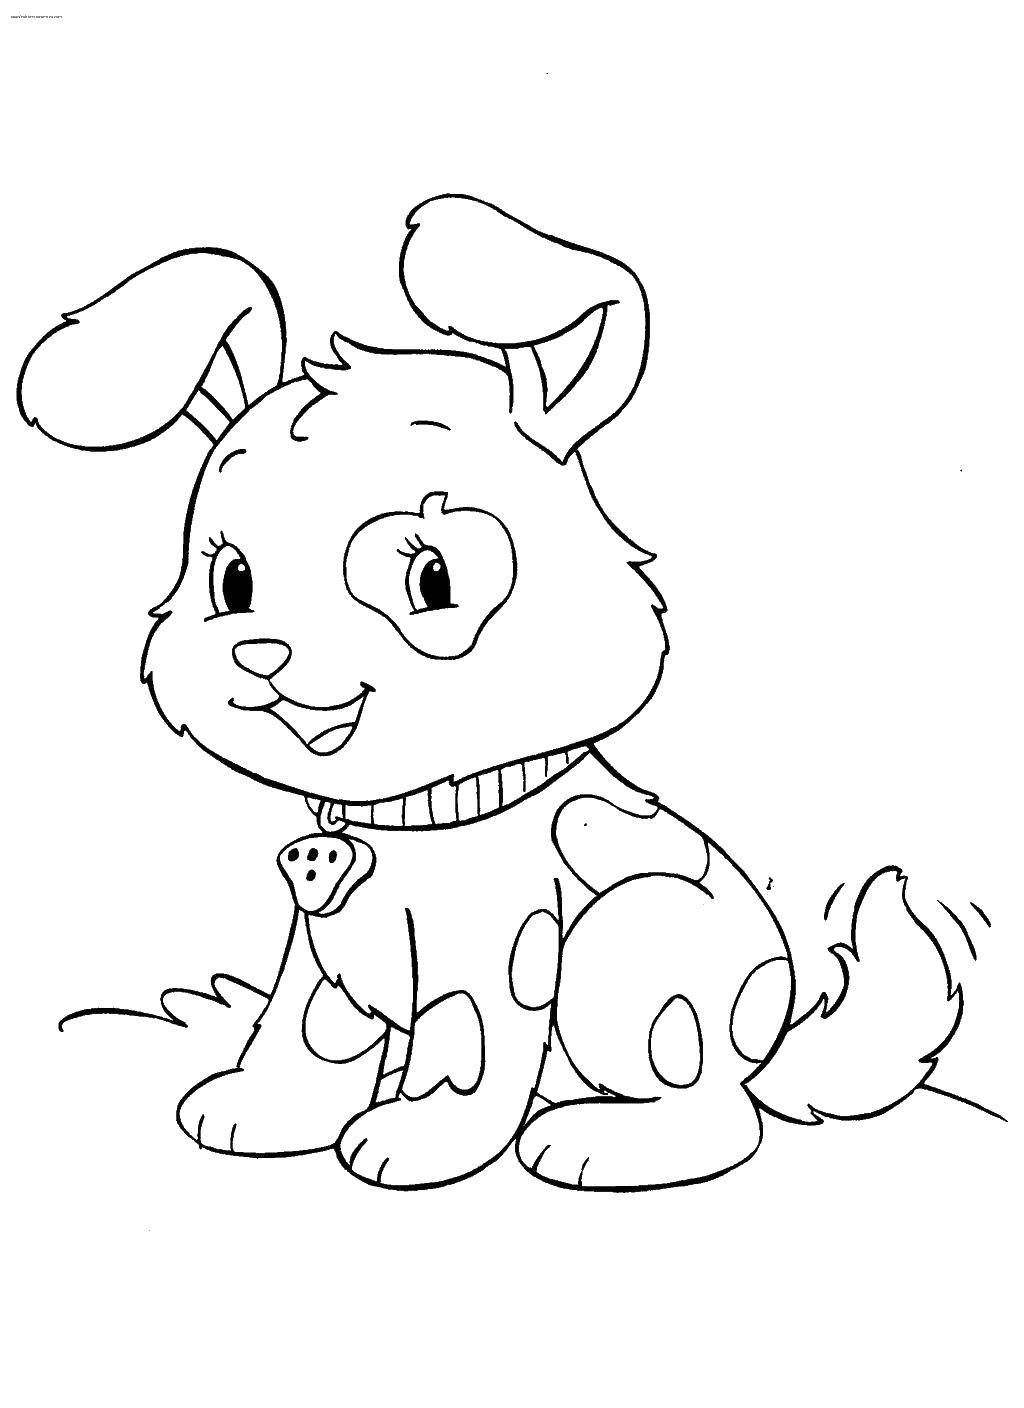 Coloring Doggy with a collar of klubnikoy. Category Pets allowed. Tags:  animals, dog, puppy, dog.